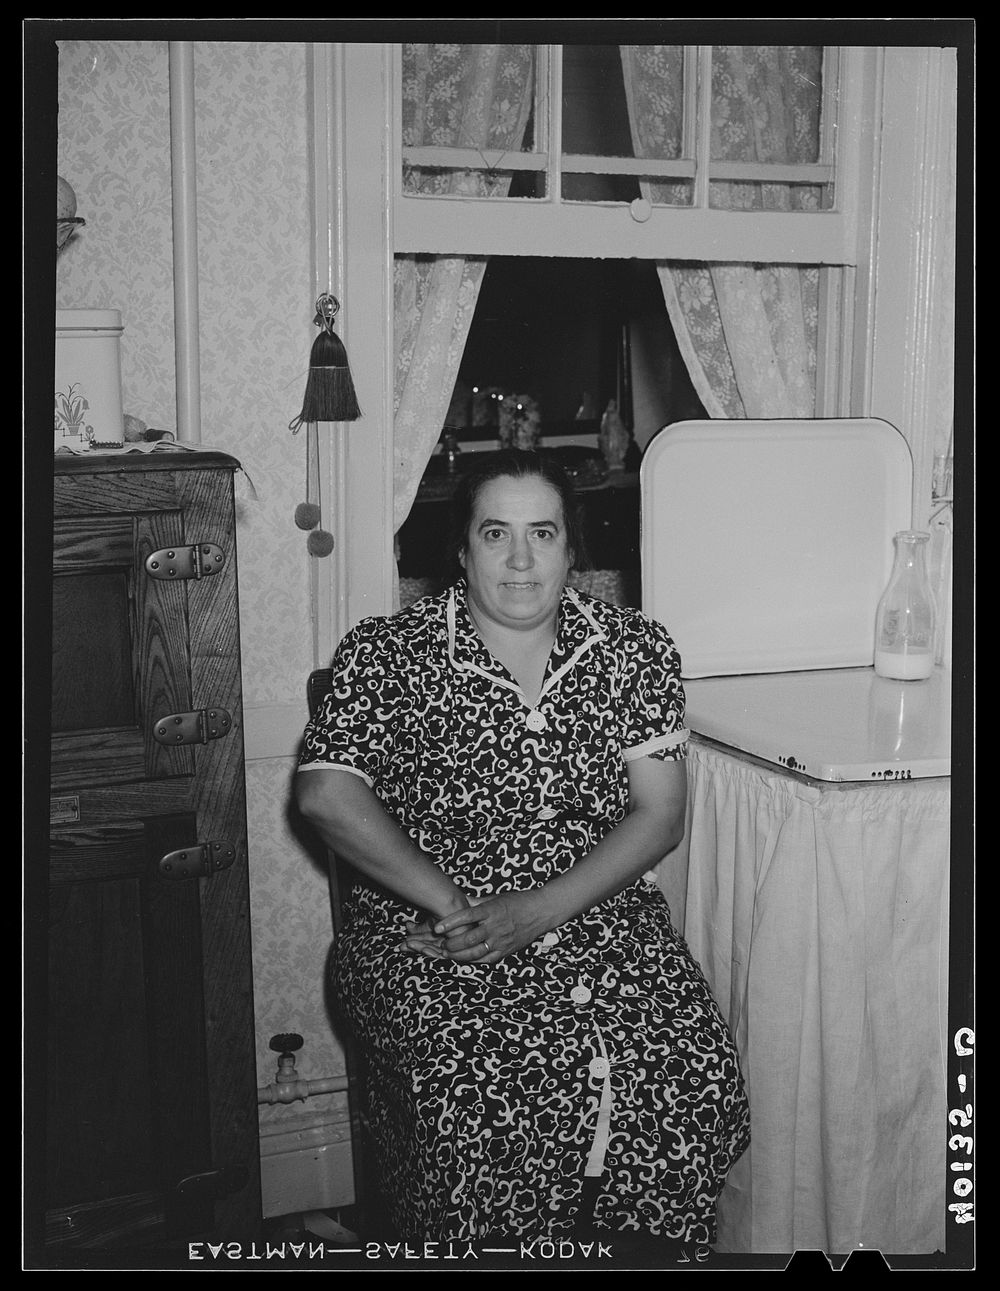 Mrs. Montefiori at the kitchen of her apartment. 340 East 63rd Street. Sourced from the Library of Congress.